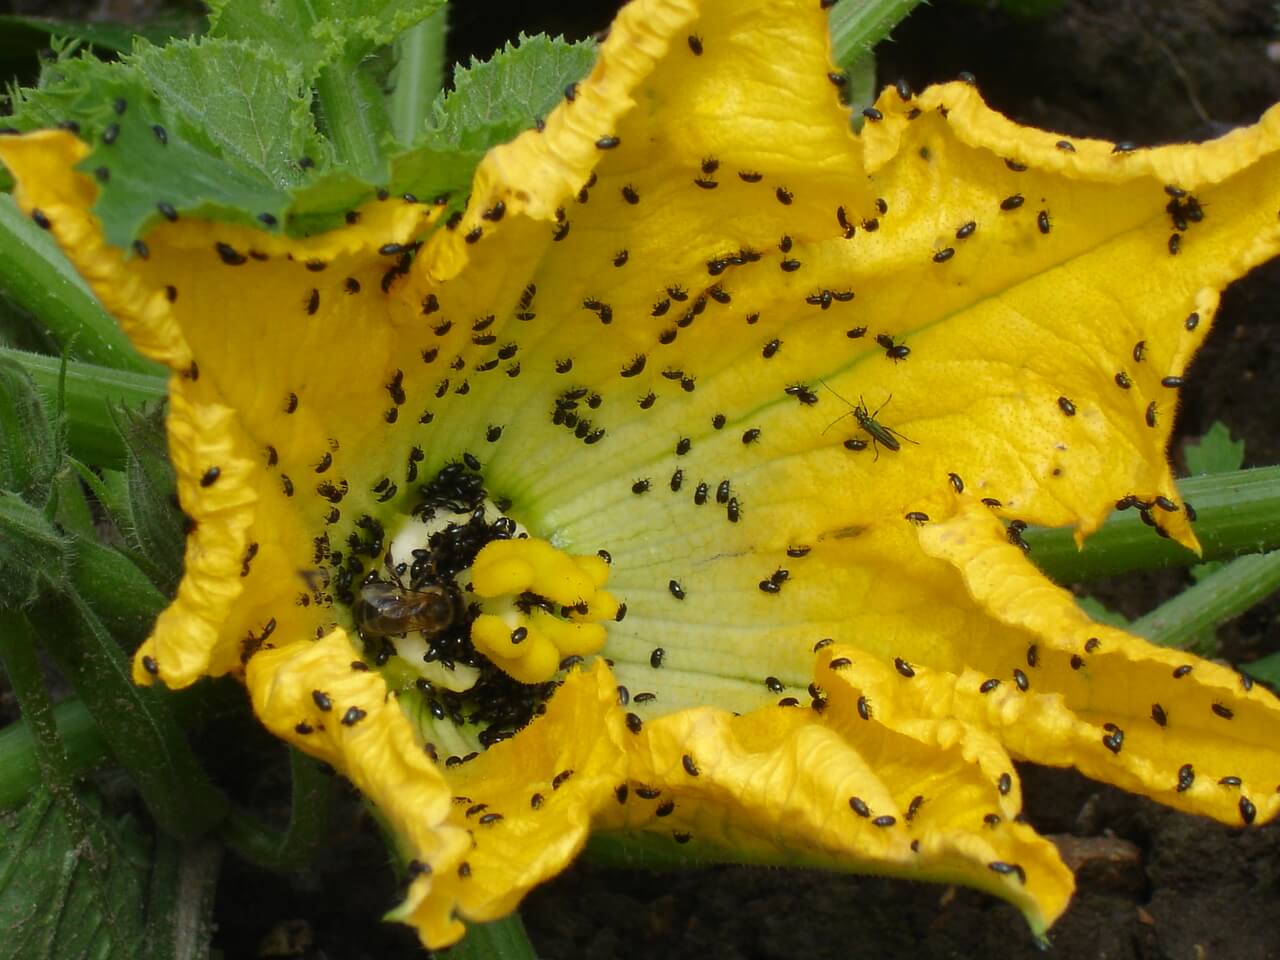 Close-up of a flower with lots pf bugs inside